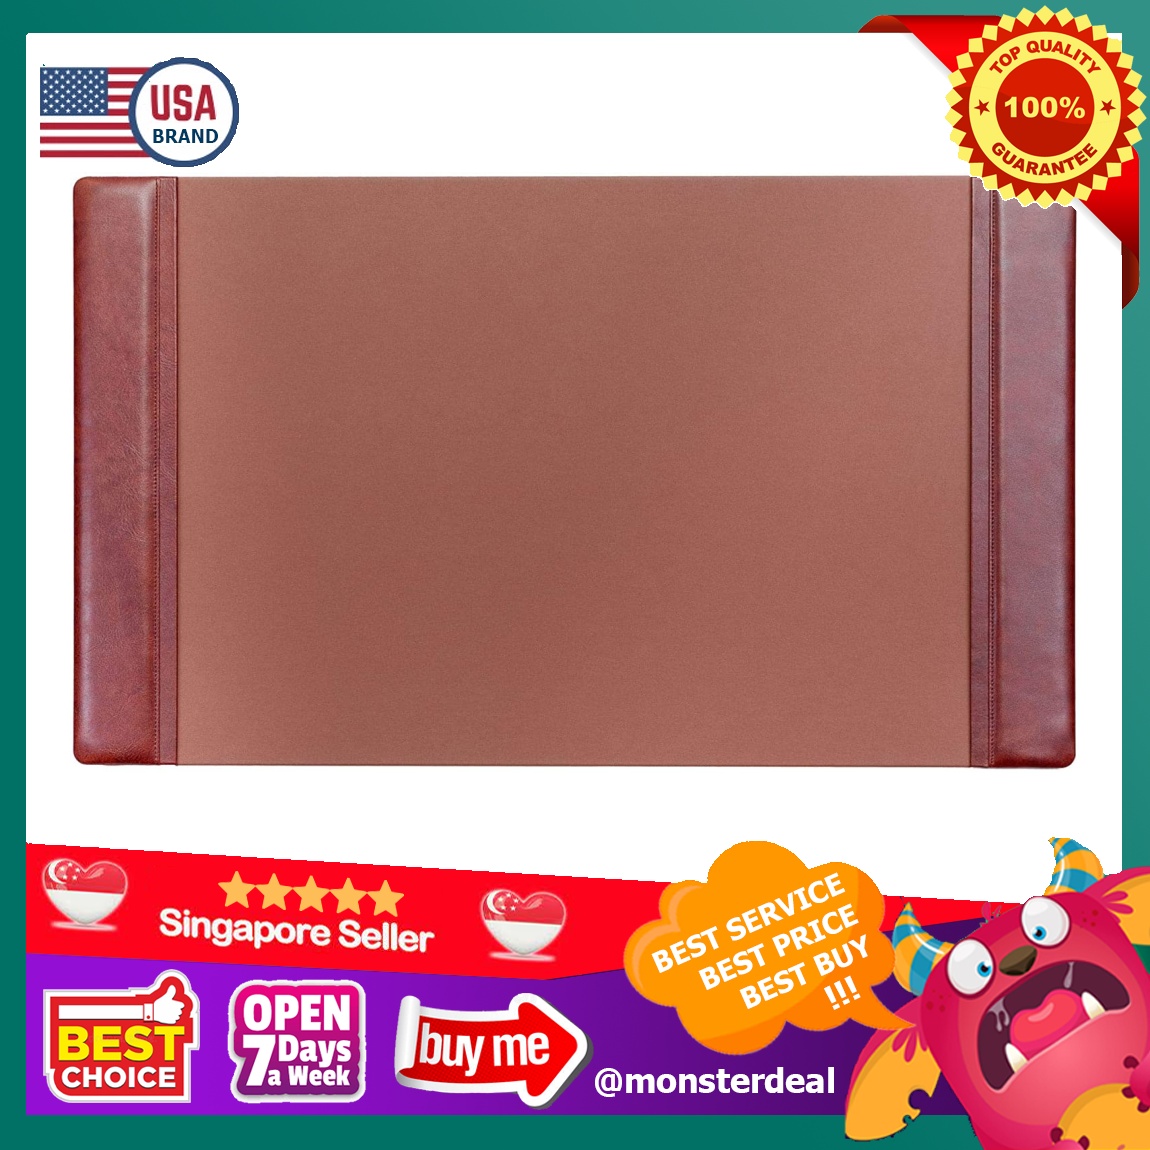 Dacasso Classic Leather Mat Desk pad, 34 x 20, Chocolate Brown